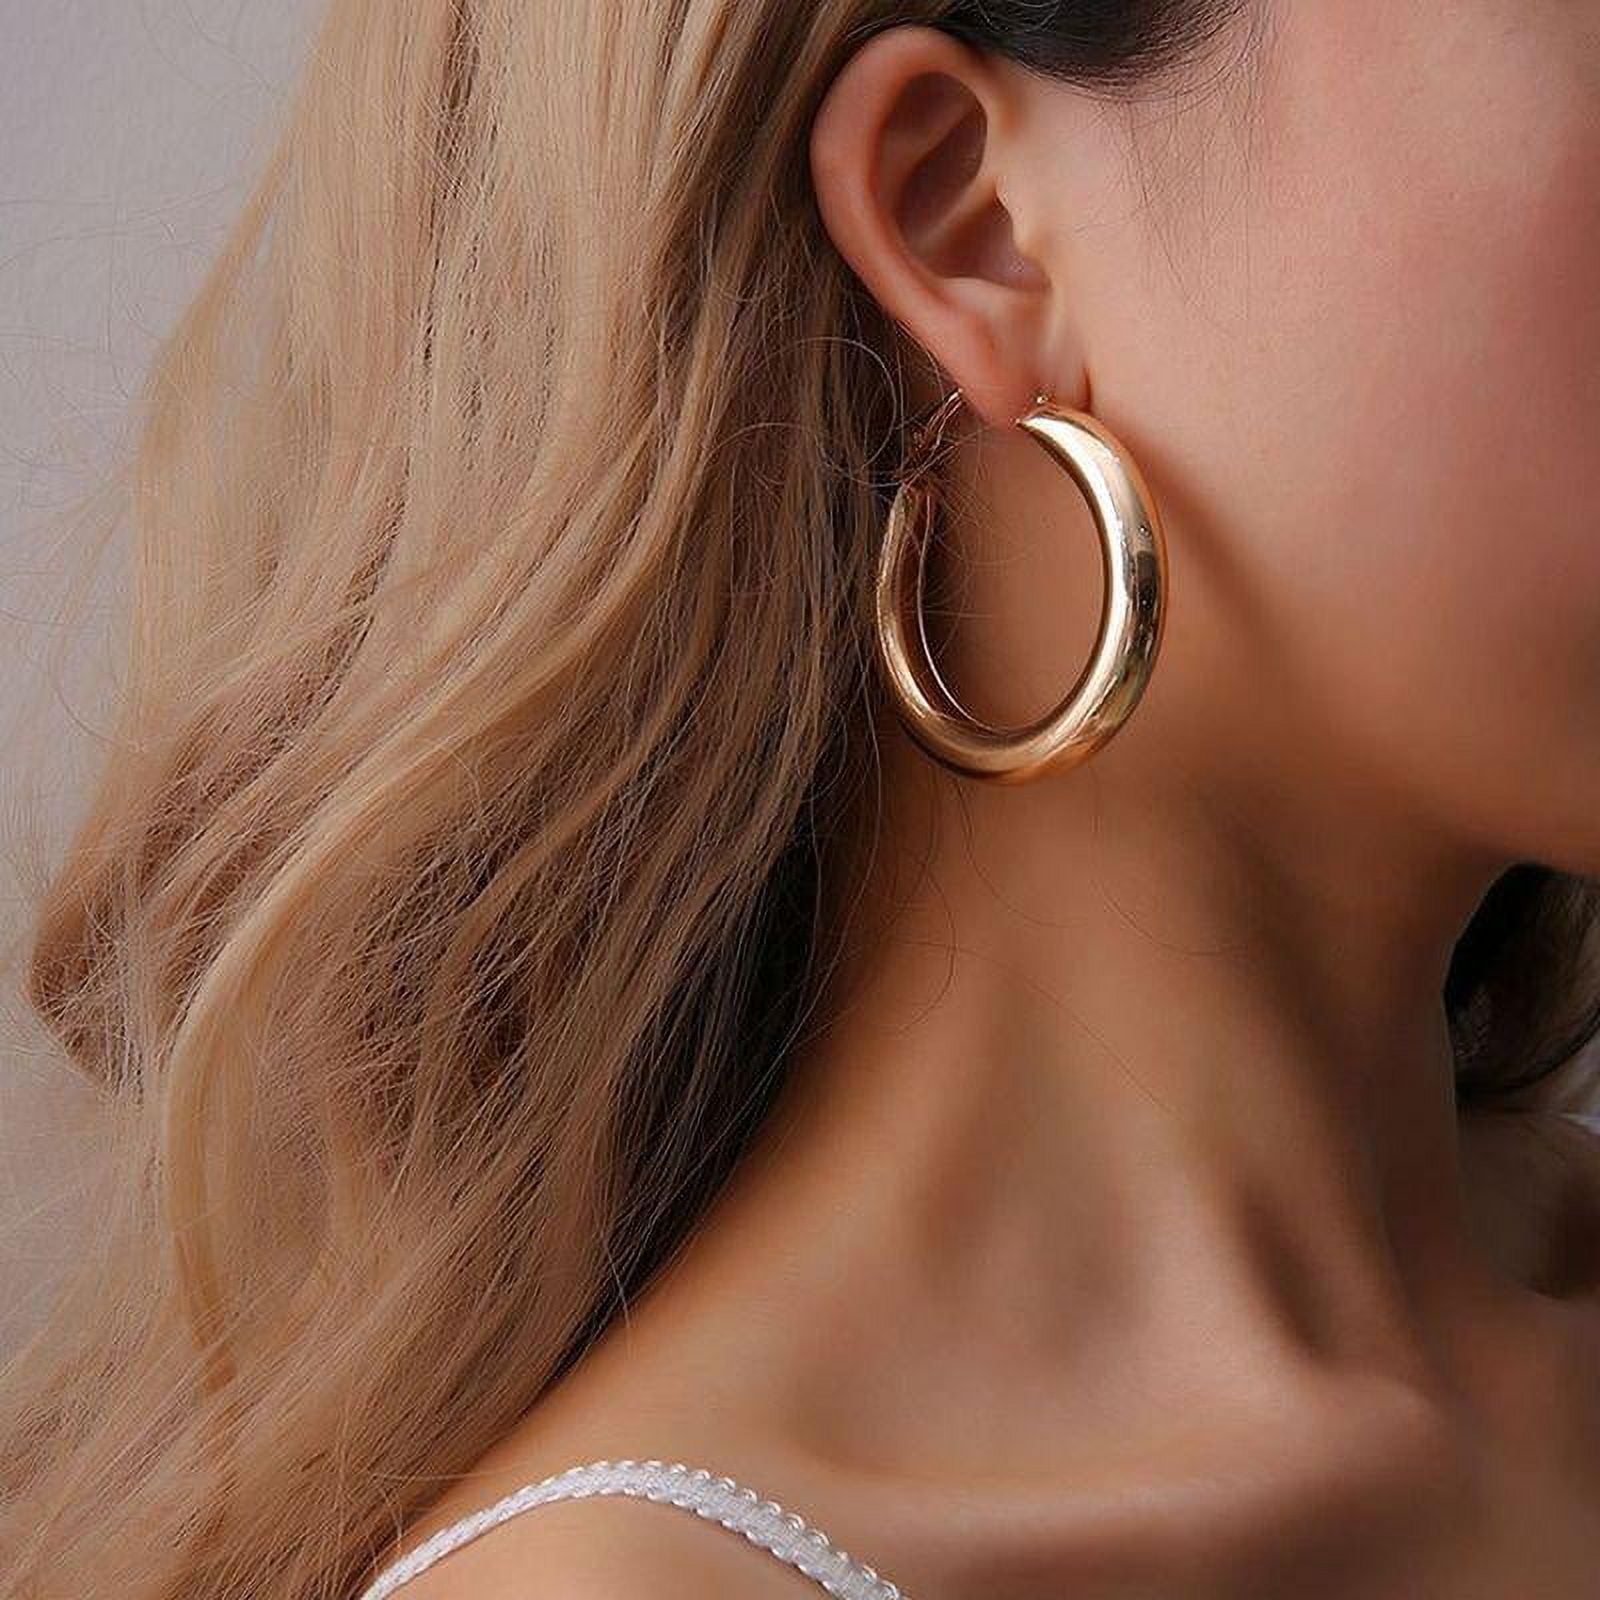 Buy 14k Solid White Gold 2mm Hoop Earrings 15mm-60mm, Everyday Classic Hoops,  All Sizes Available, Round White Gold Hoops, Gift for Women Online in India  - Etsy